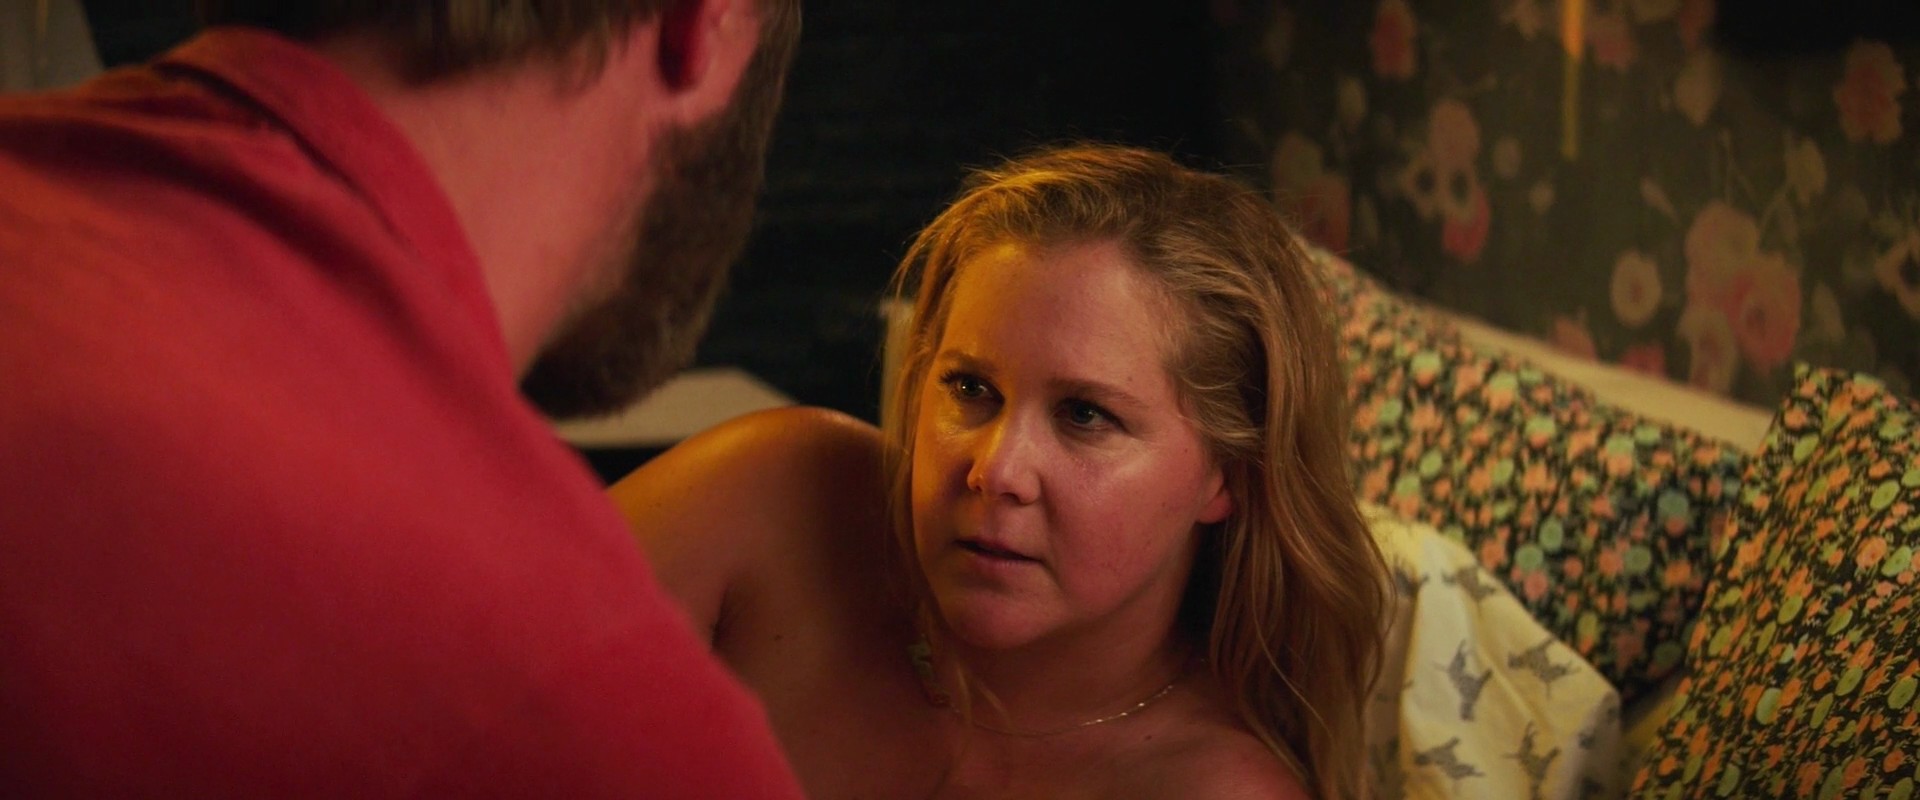 Amy Schumer appears nude behind a man when we first get an out-of-focus gli...